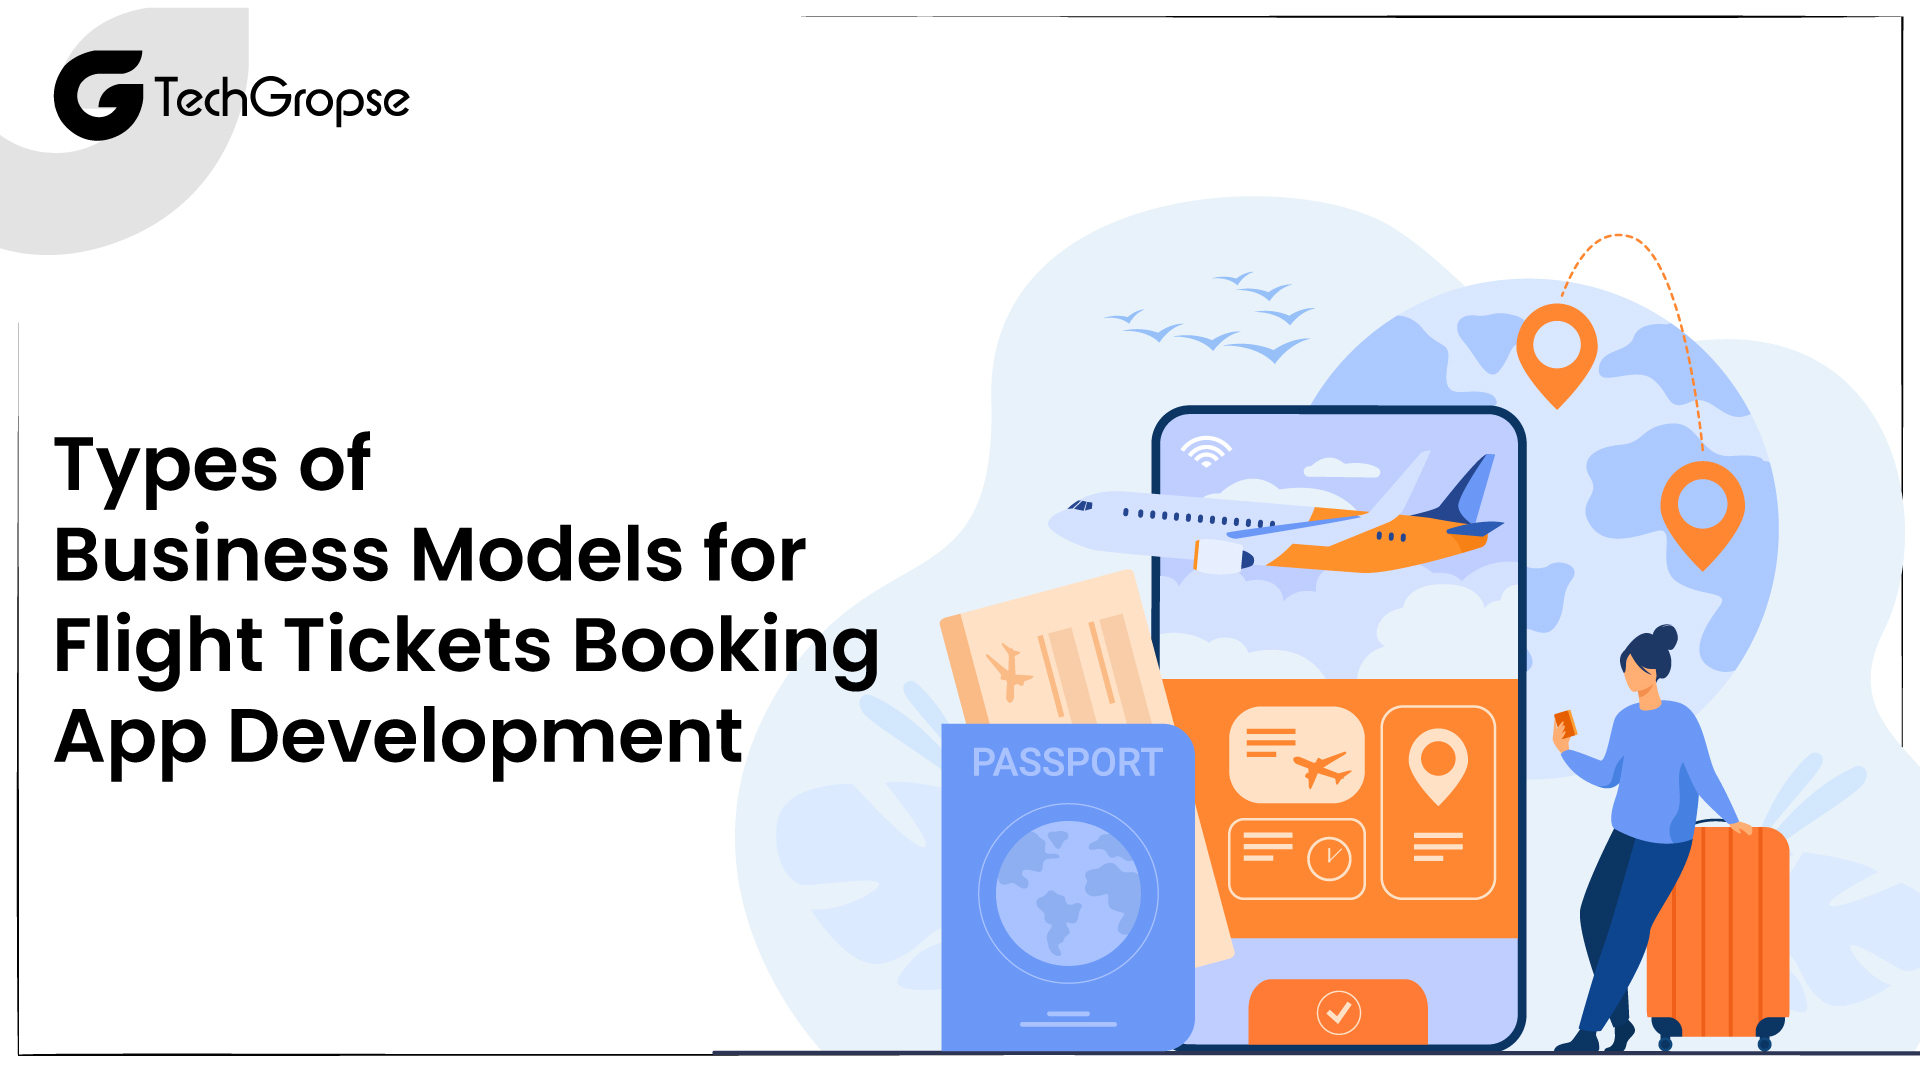 Types of Business Models for Flight Tickets Booking App Development